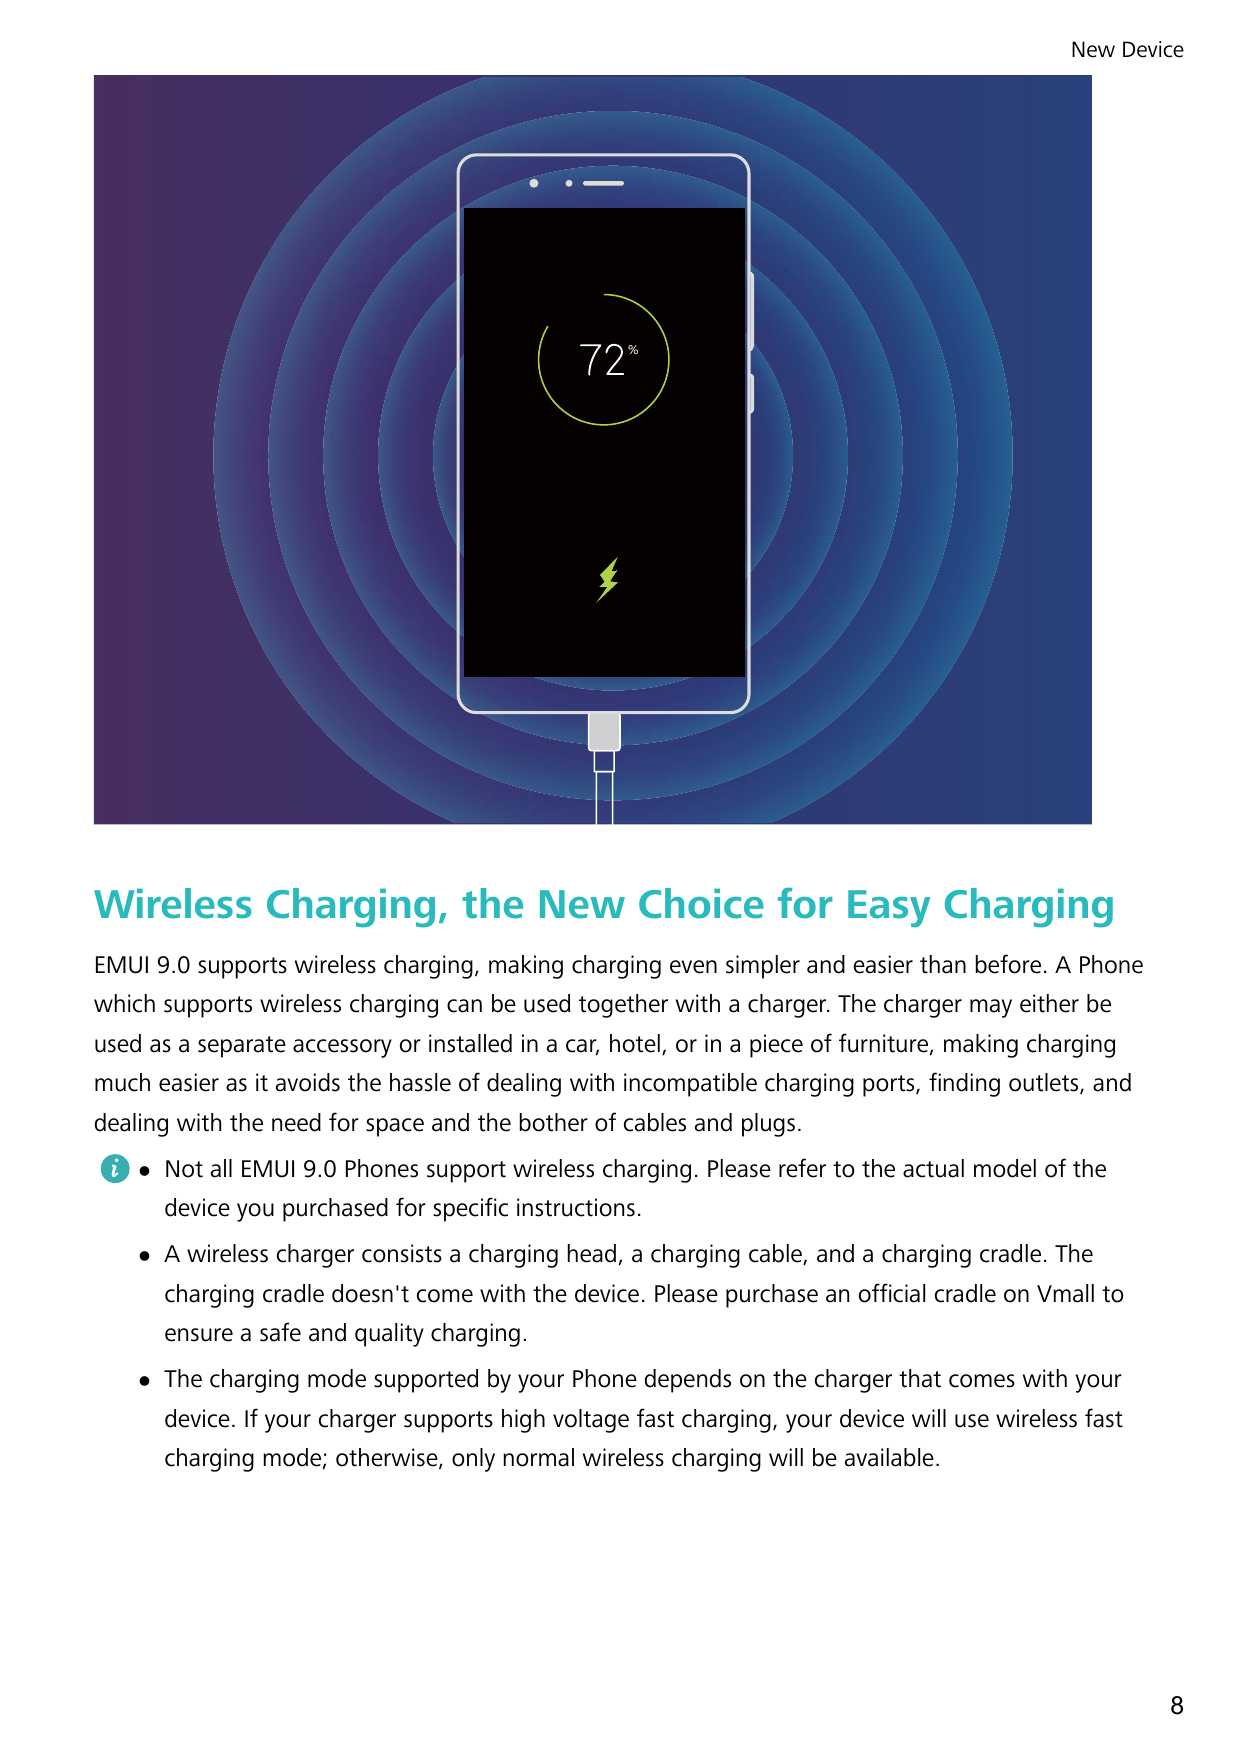 New DeviceWireless Charging, the New Choice for Easy ChargingEMUI 9.0 supports wireless charging, making charging even simpler a